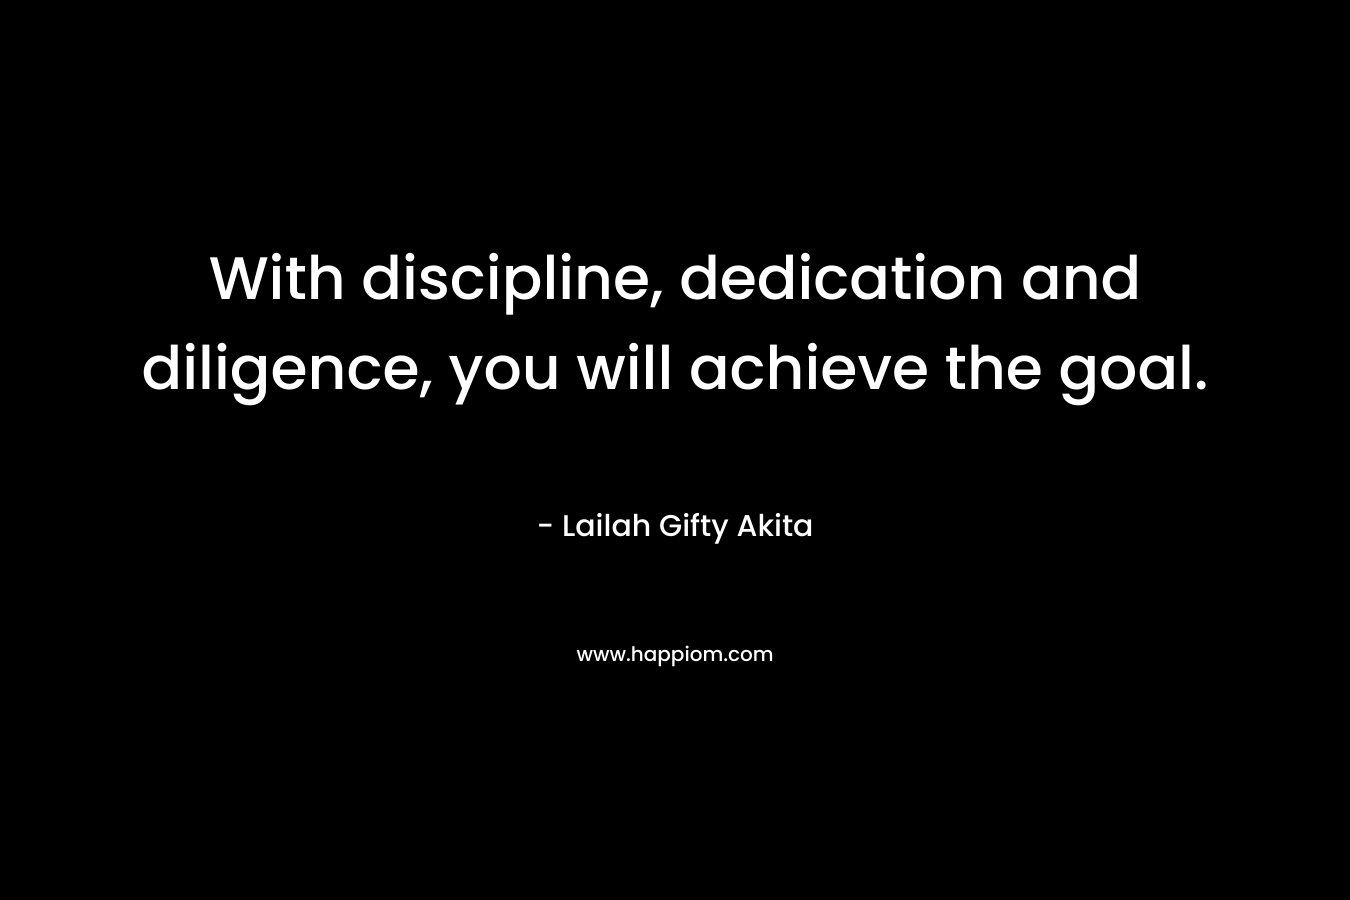 With discipline, dedication and diligence, you will achieve the goal.